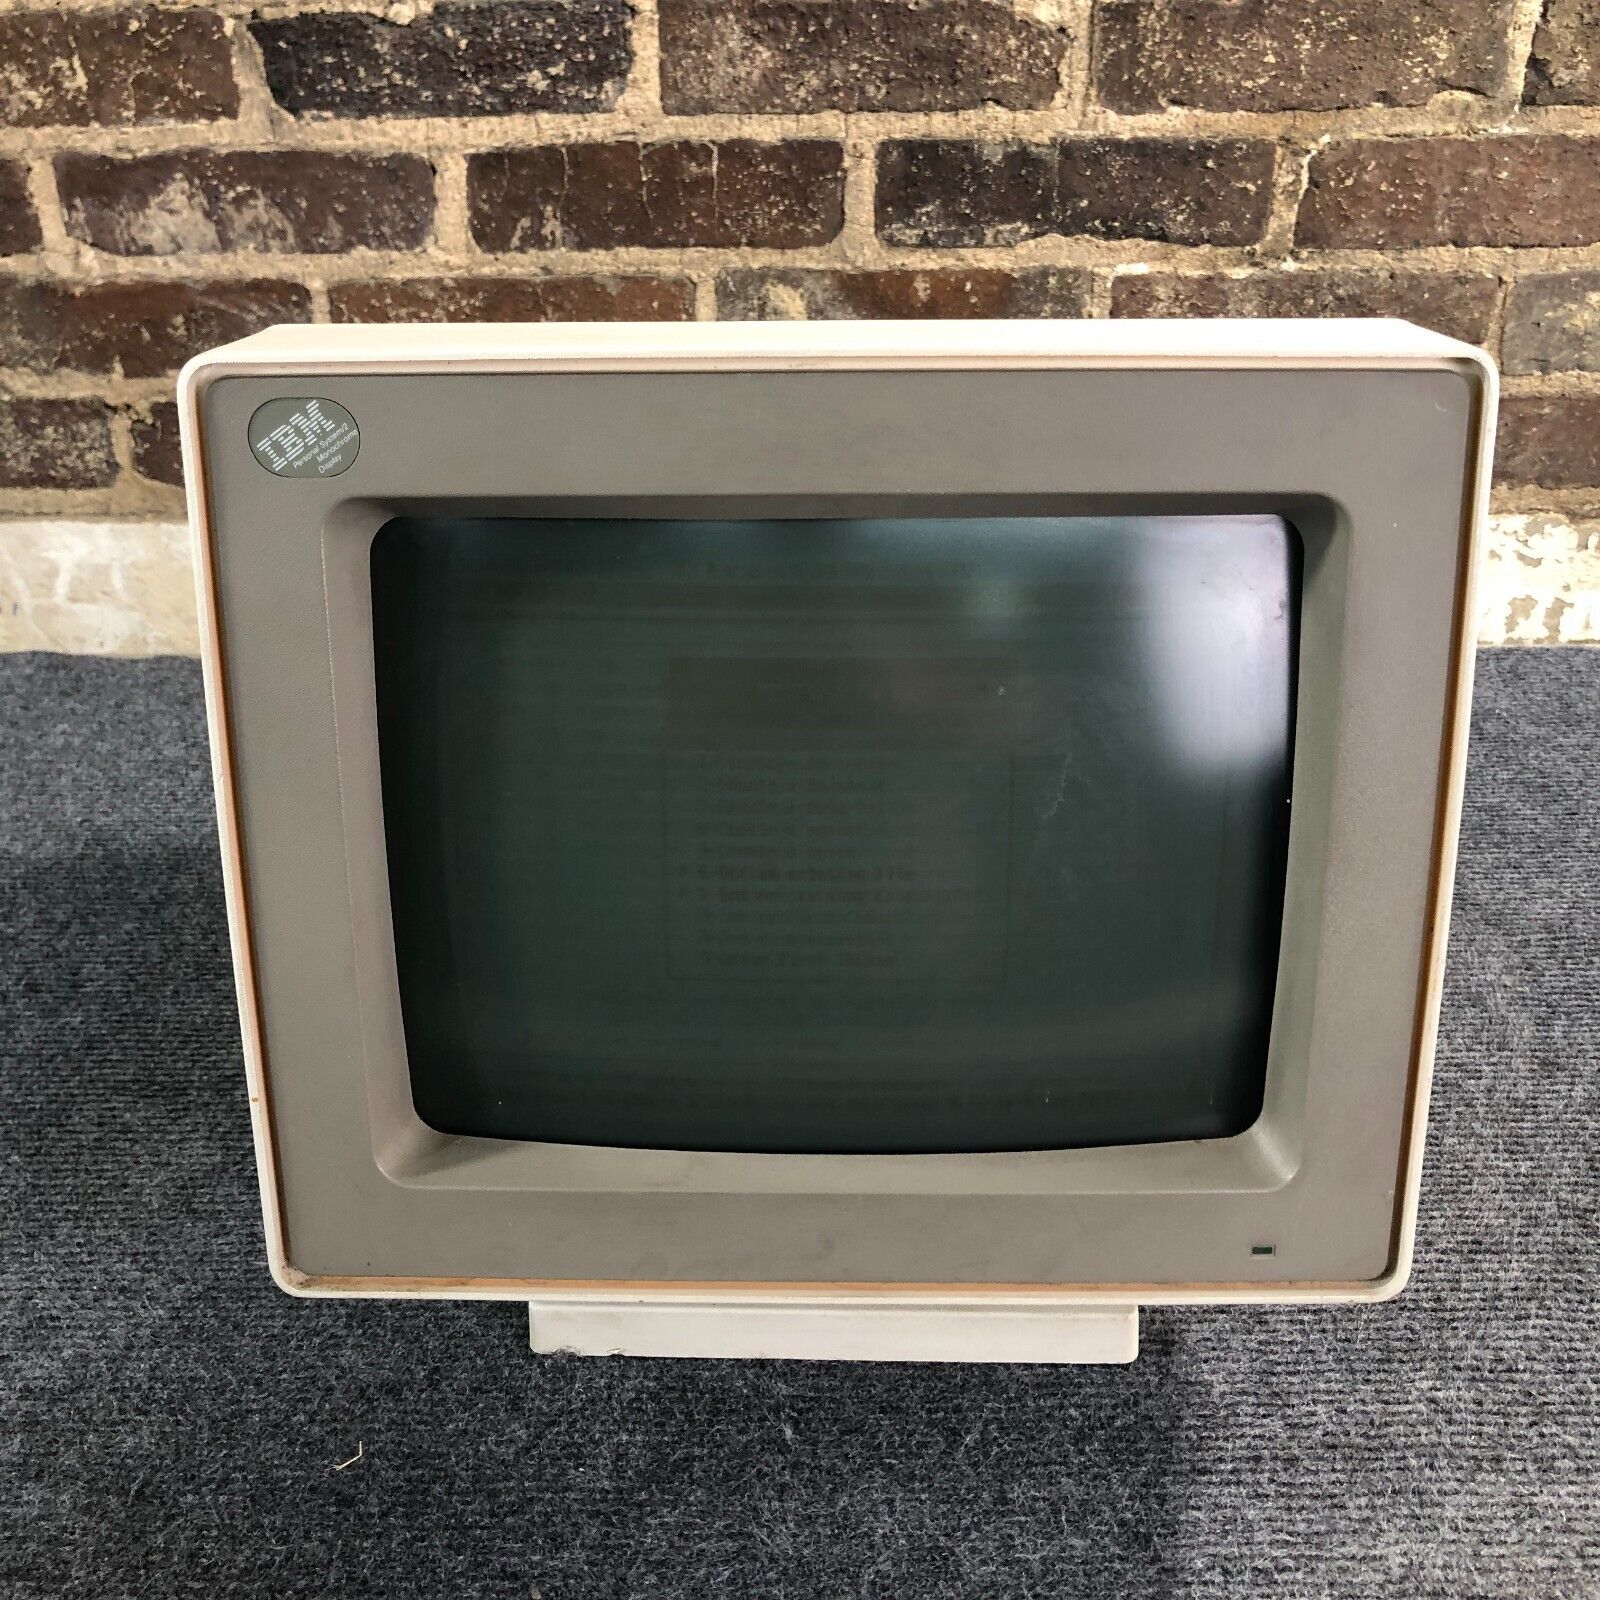 IBM 8503 8503001 Greyscale Monochrome CRT Computer Monitor - WORKS GREAT